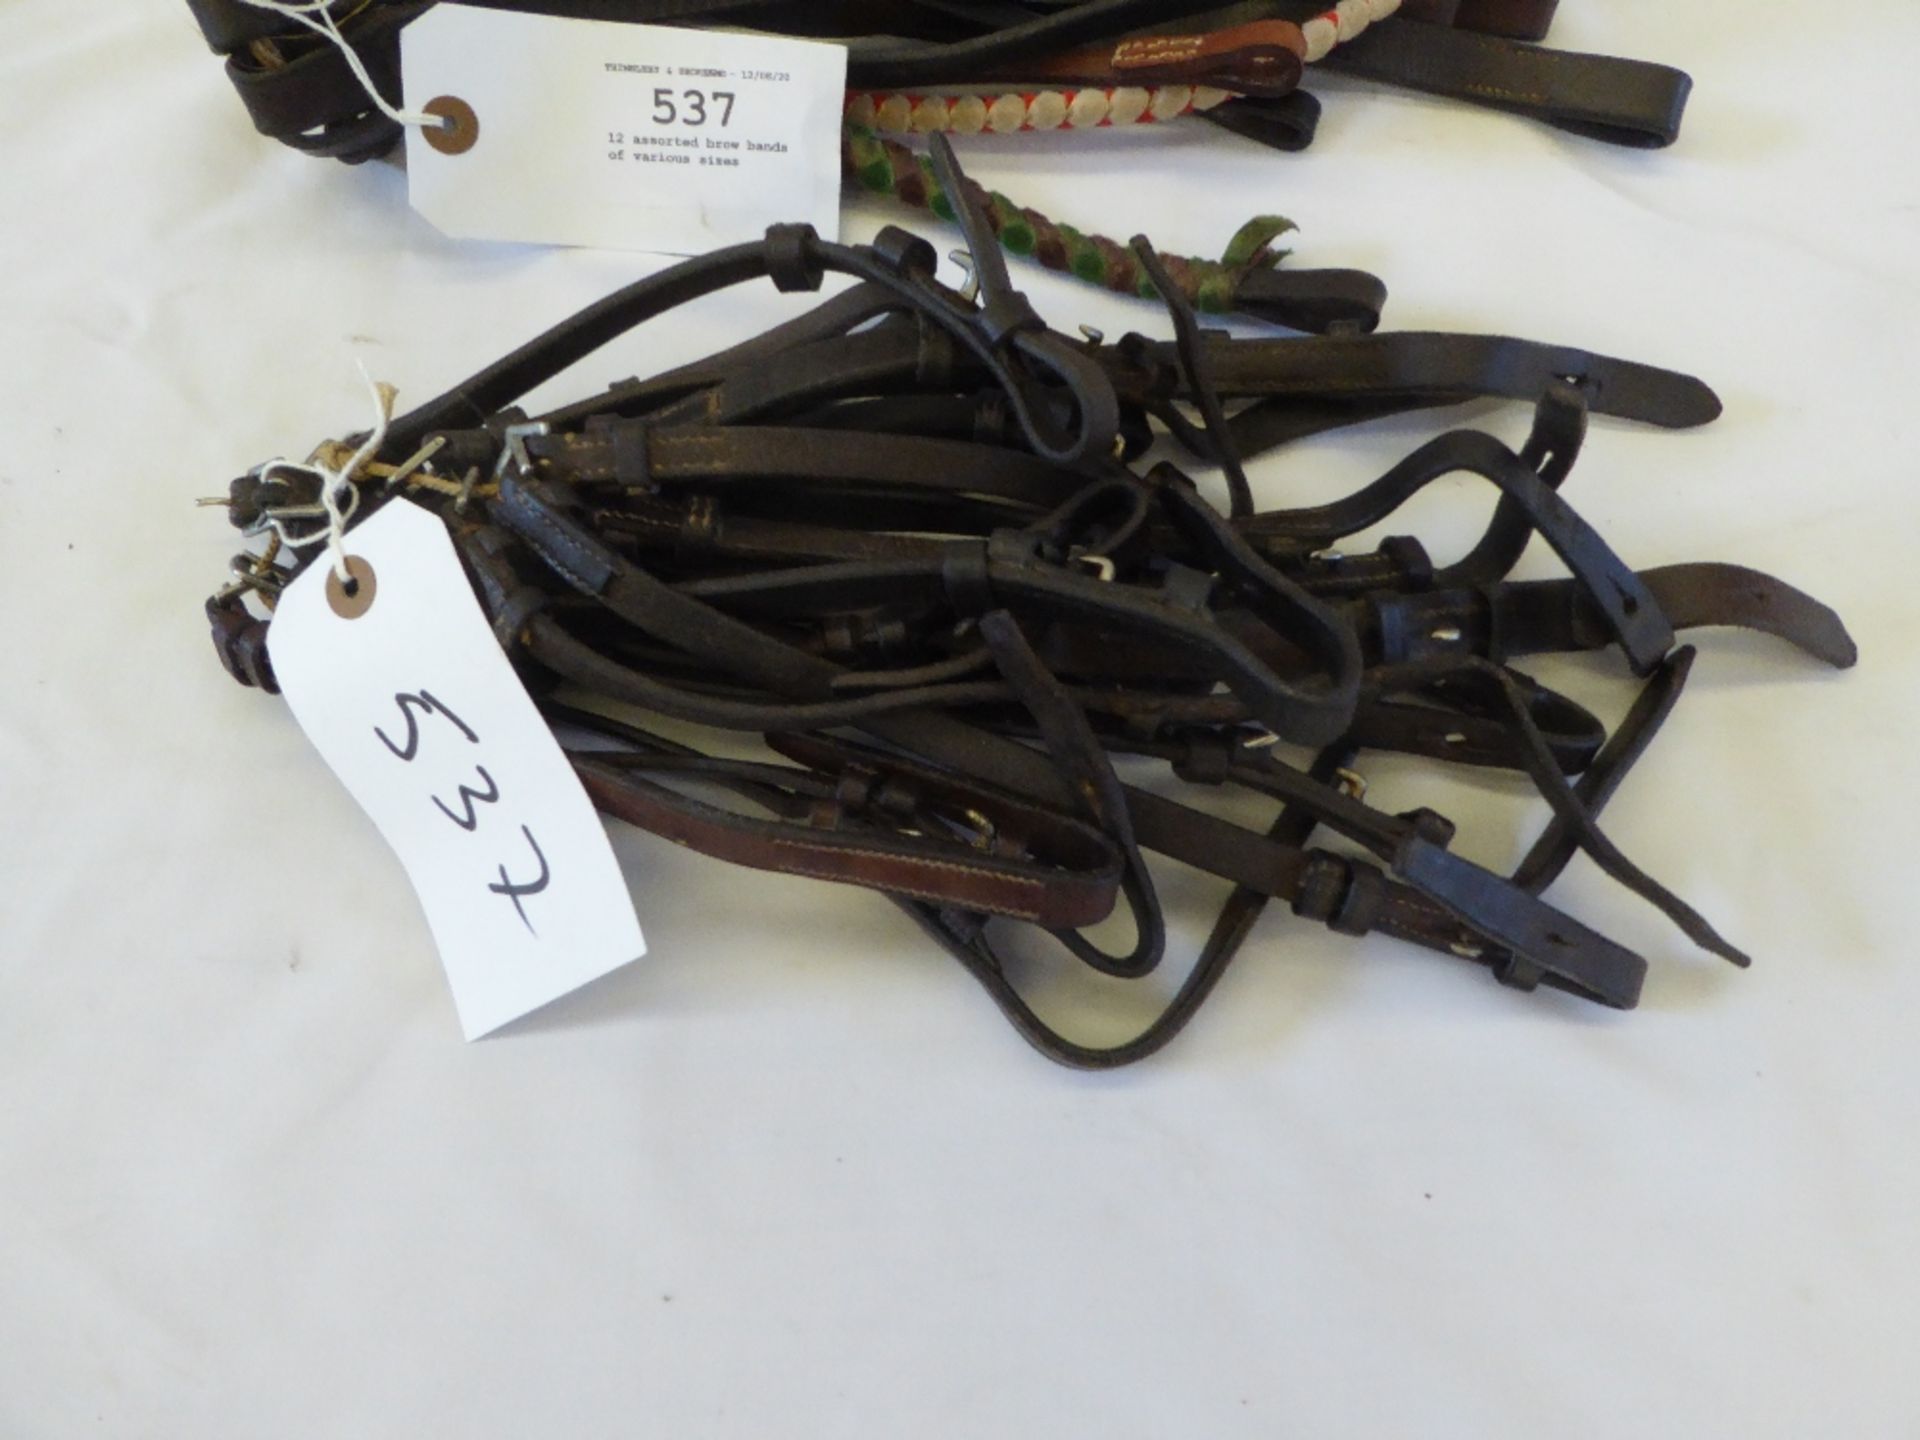 12 assorted brow bands of various sizes and 20 cheek pieces for riding bridles of various length/